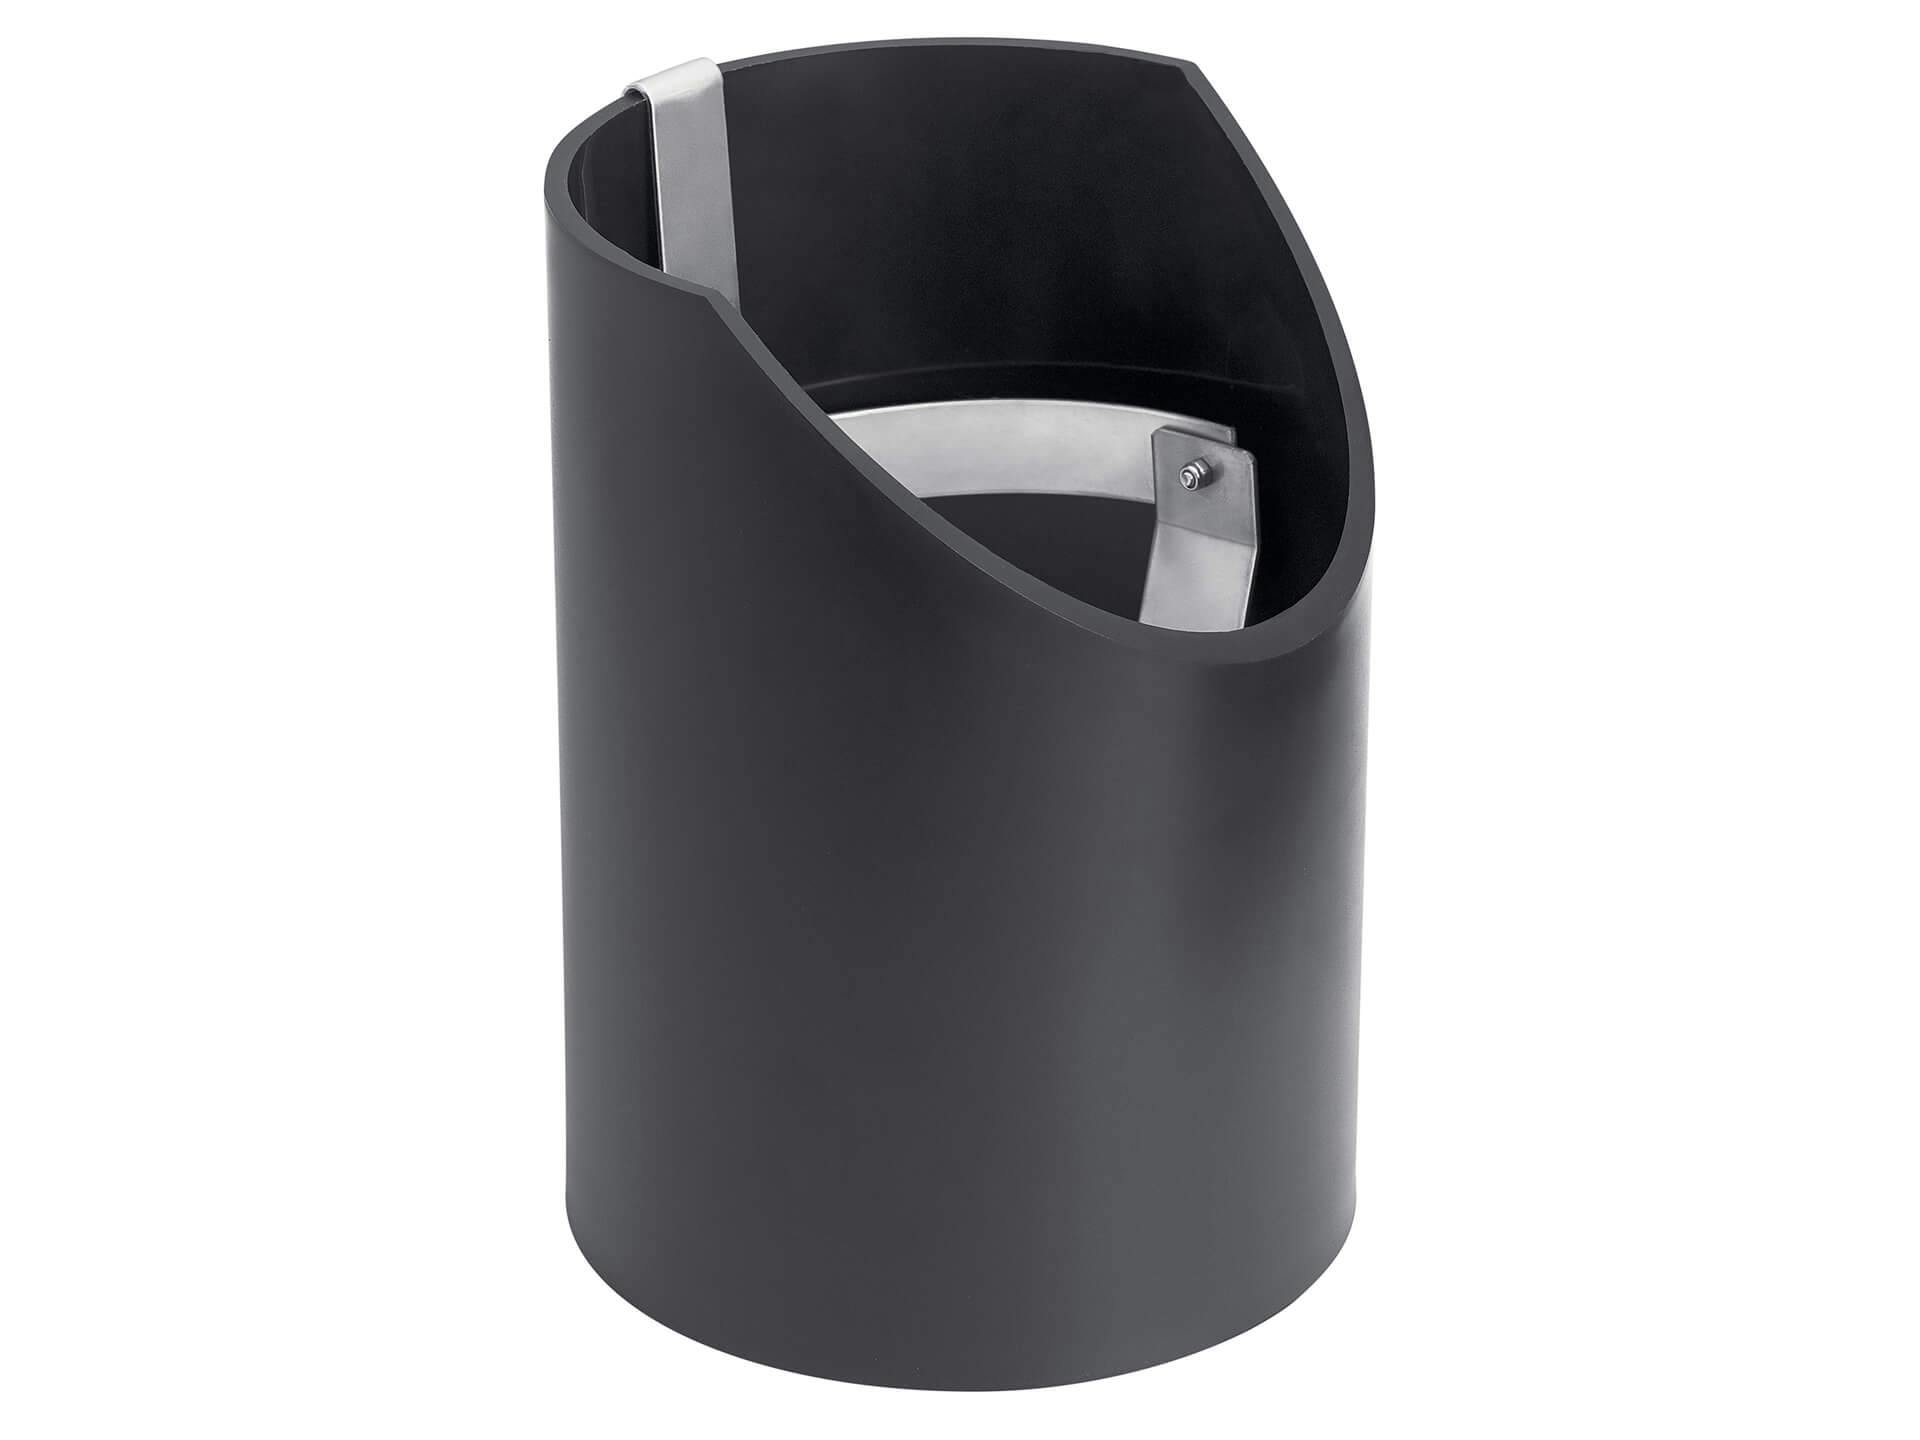 Product image of a well light universal sleeve kit in black finish